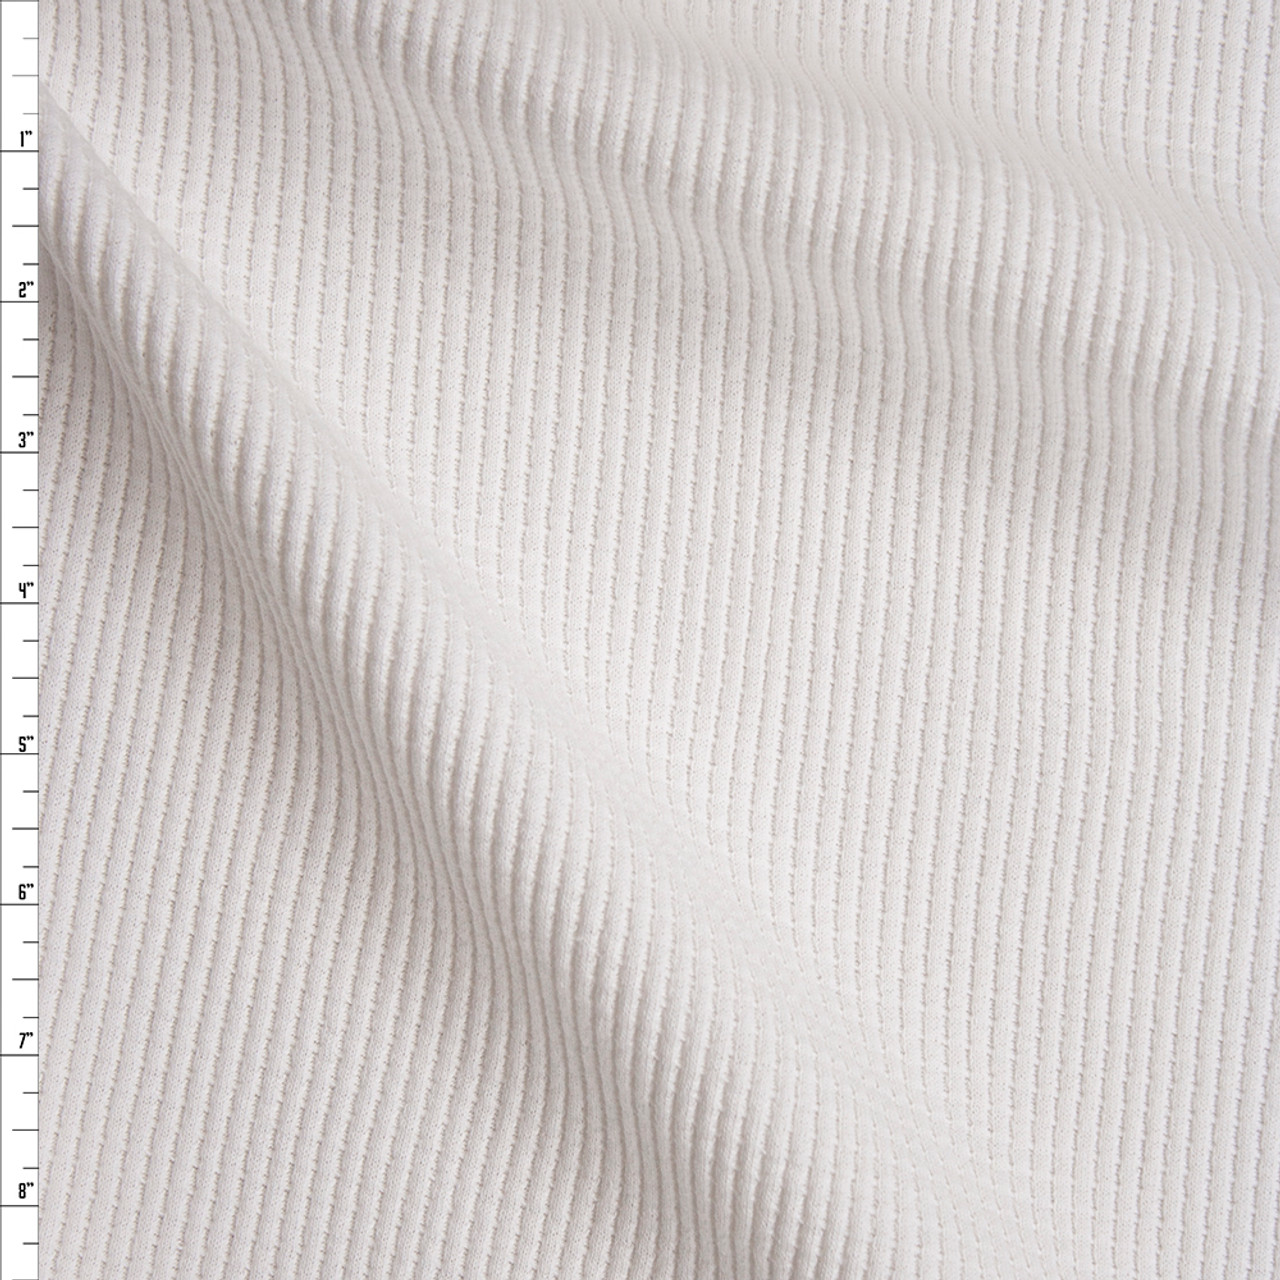 Heavy weight 100% cotton waffle weave knit rib fabric by the yard